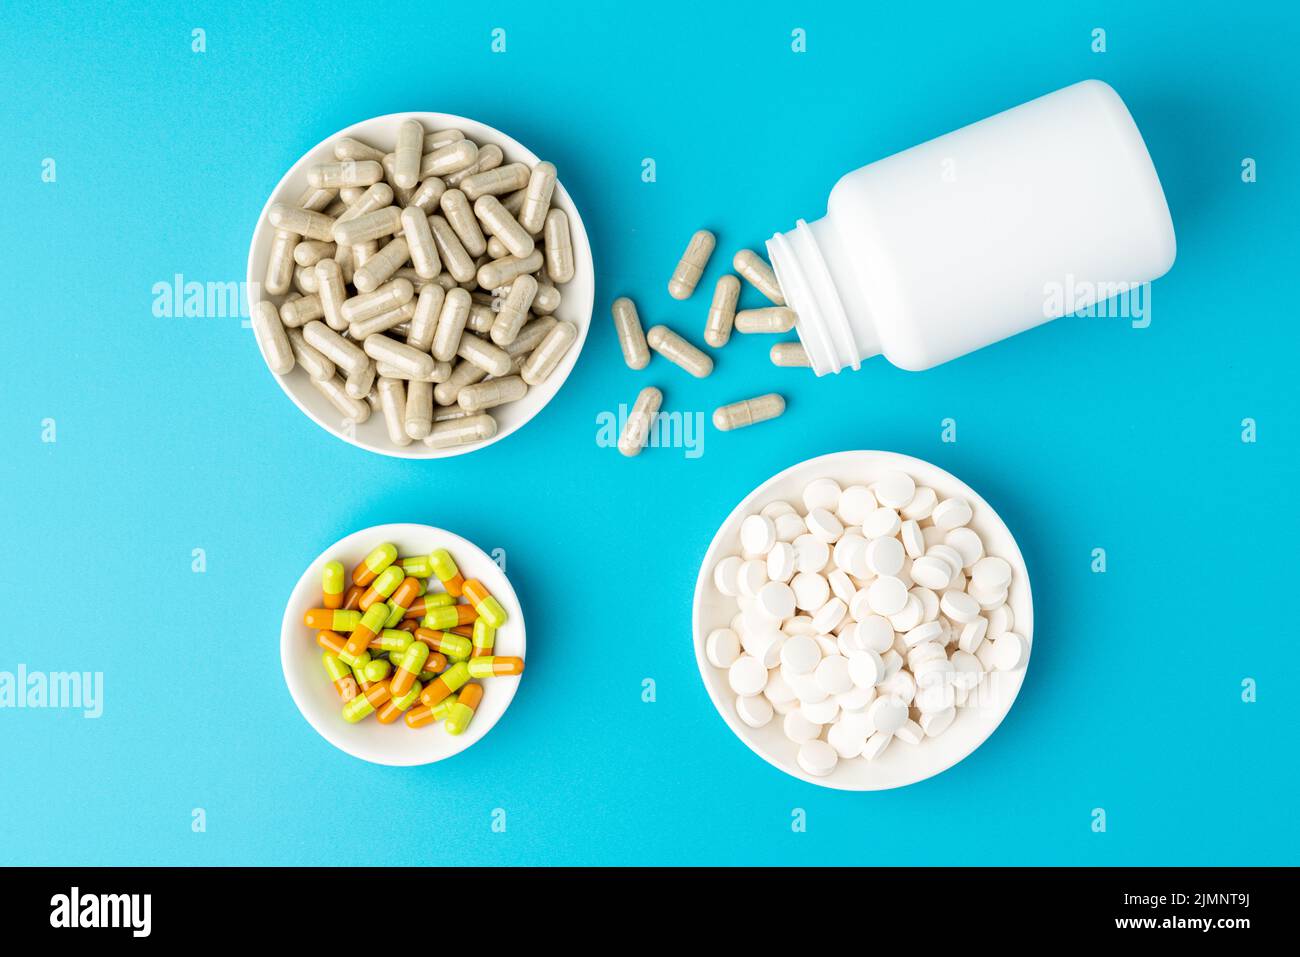 Blue background of large group of assorted capsules, pills and tablets in bottle and bowl Stock Photo